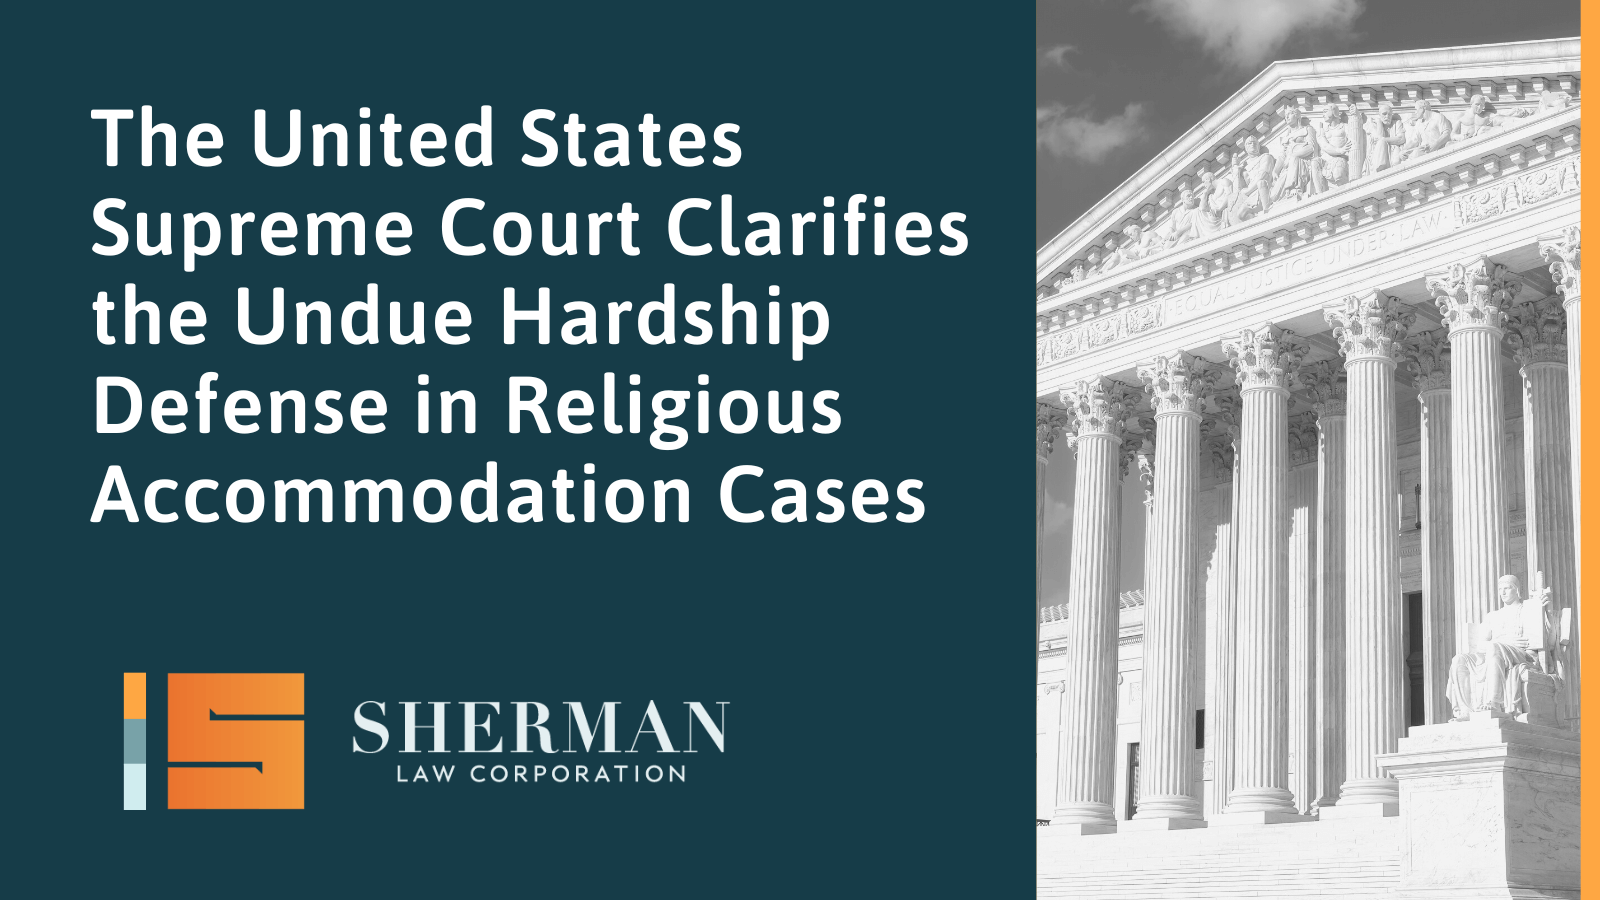 The United States Supreme Court Clarifies the Undue Hardship - callifornia employment law - sherman law corporation